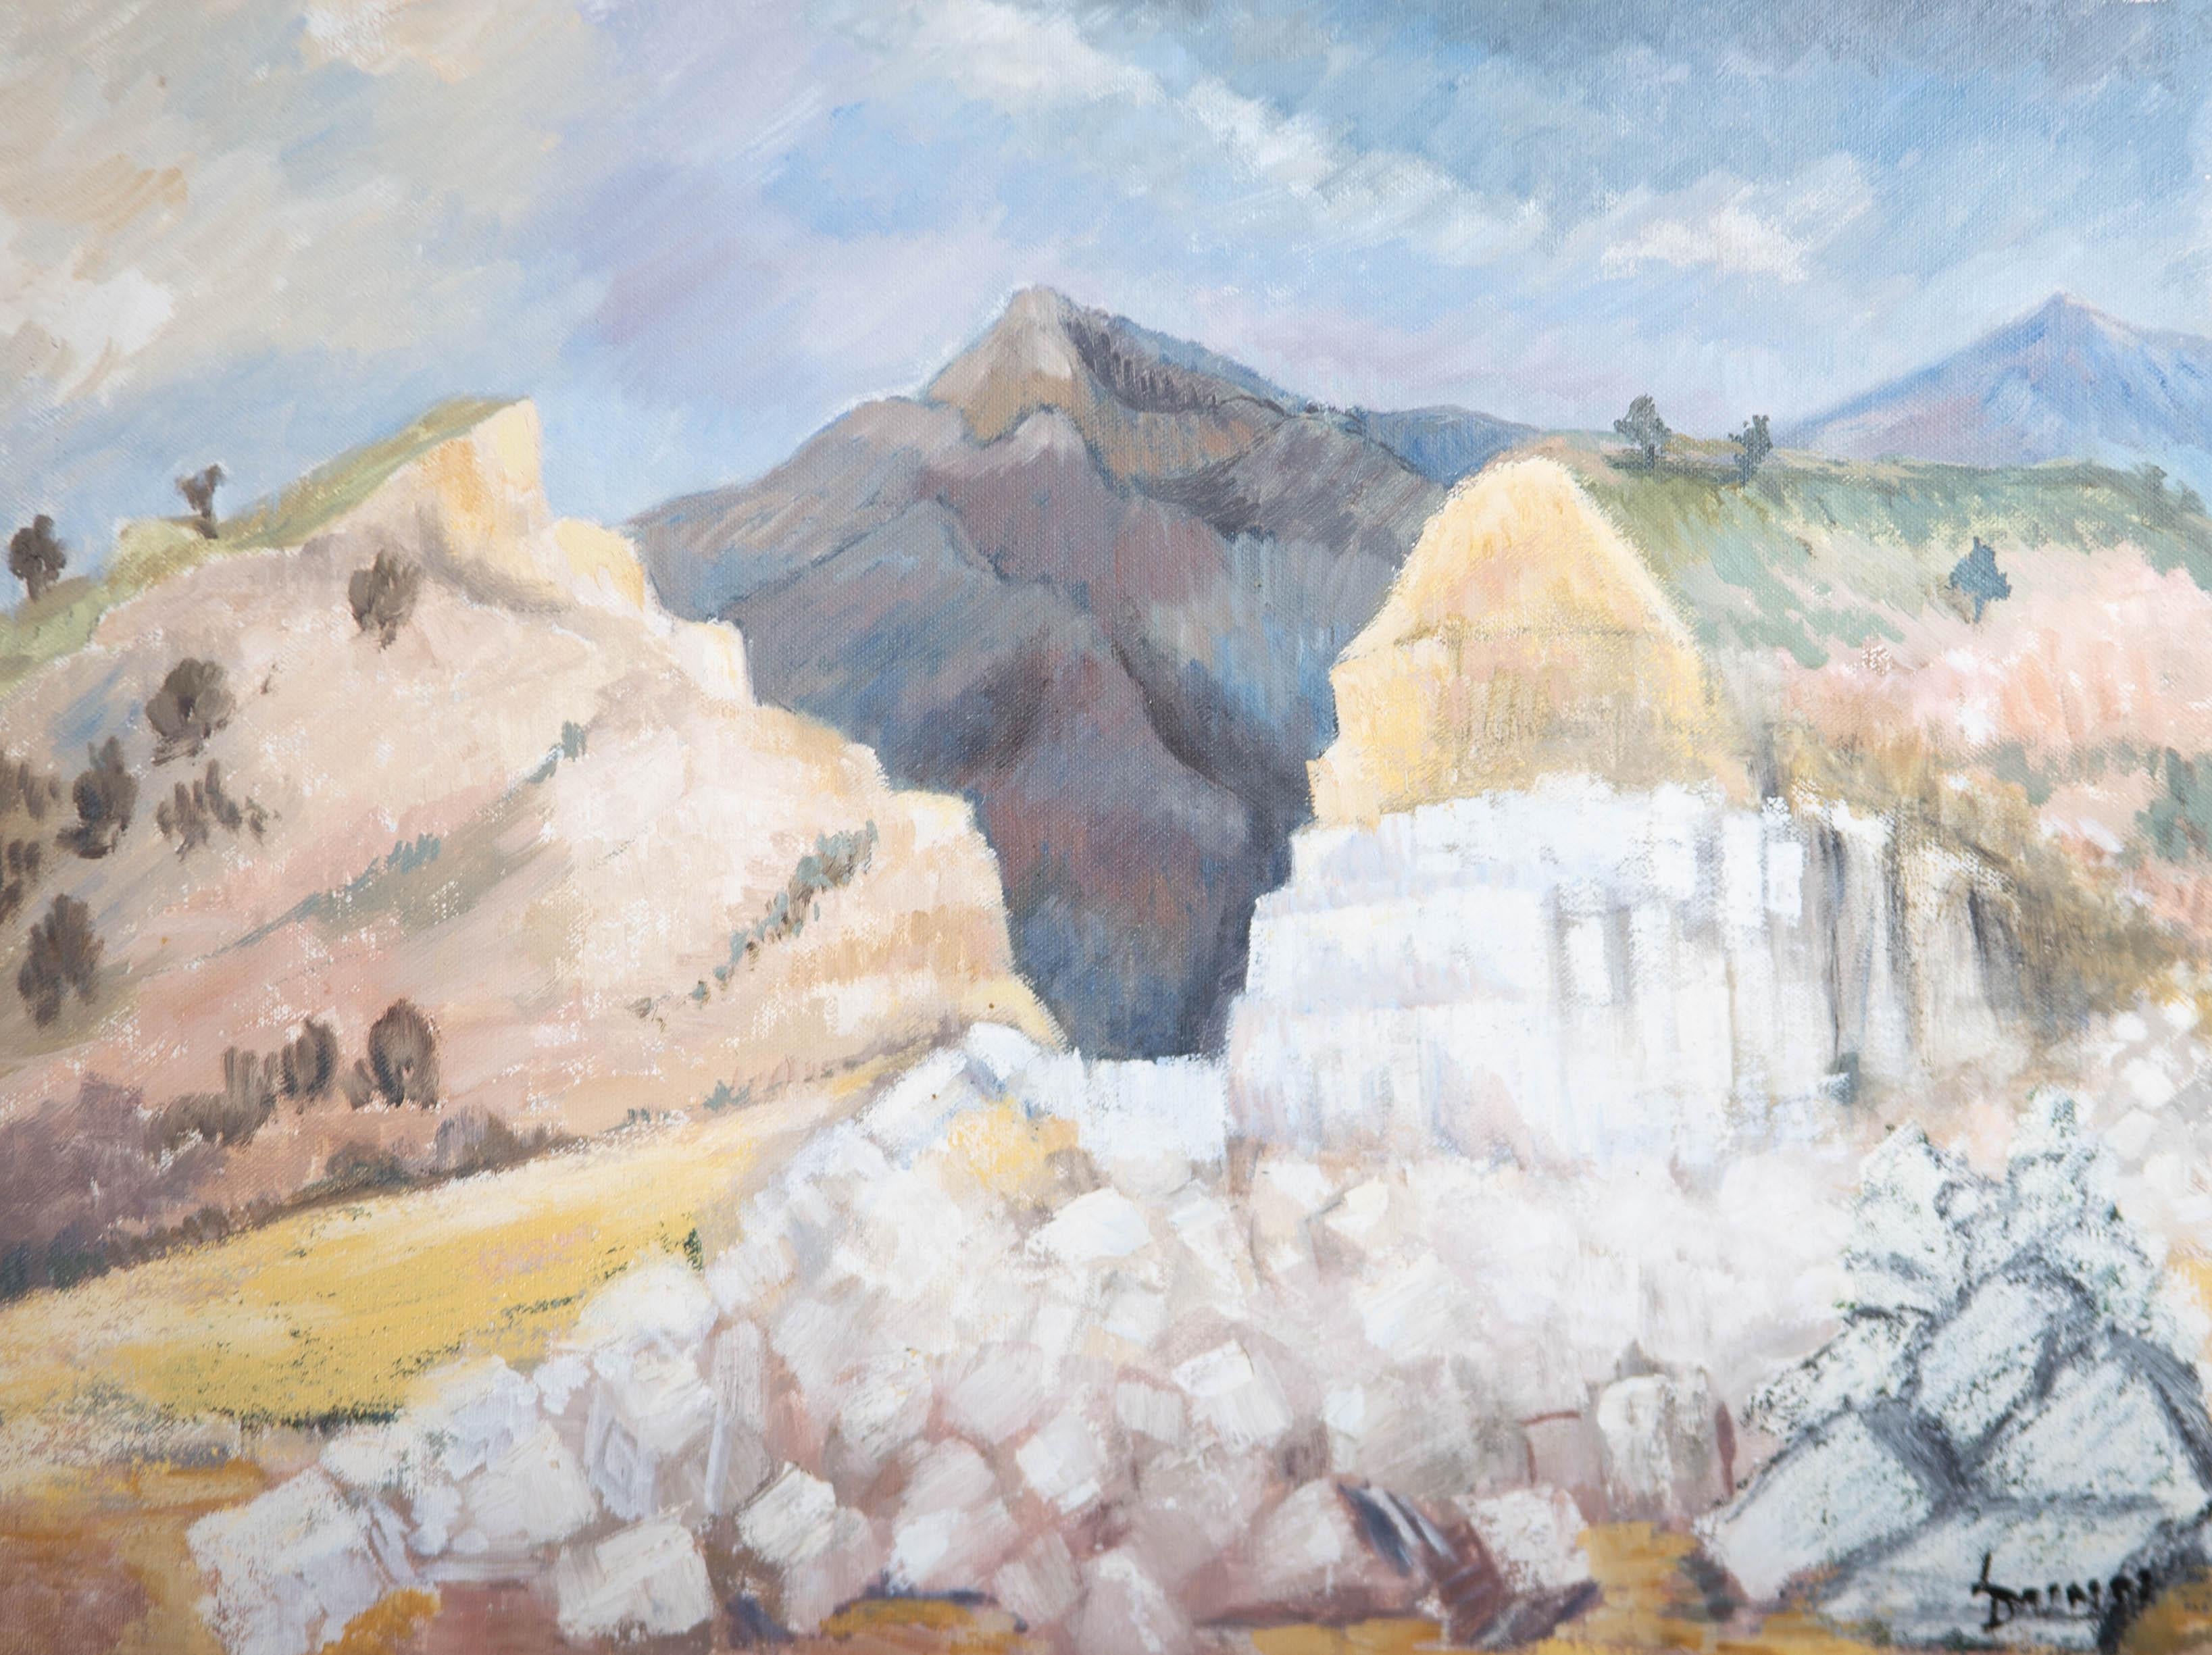 A fine mountainous landscape in oil with a modernist twist. The artist has signed to the lower right corner and the painting has a wood surround, white on the facing edge and black on the return edges. On canvas.
